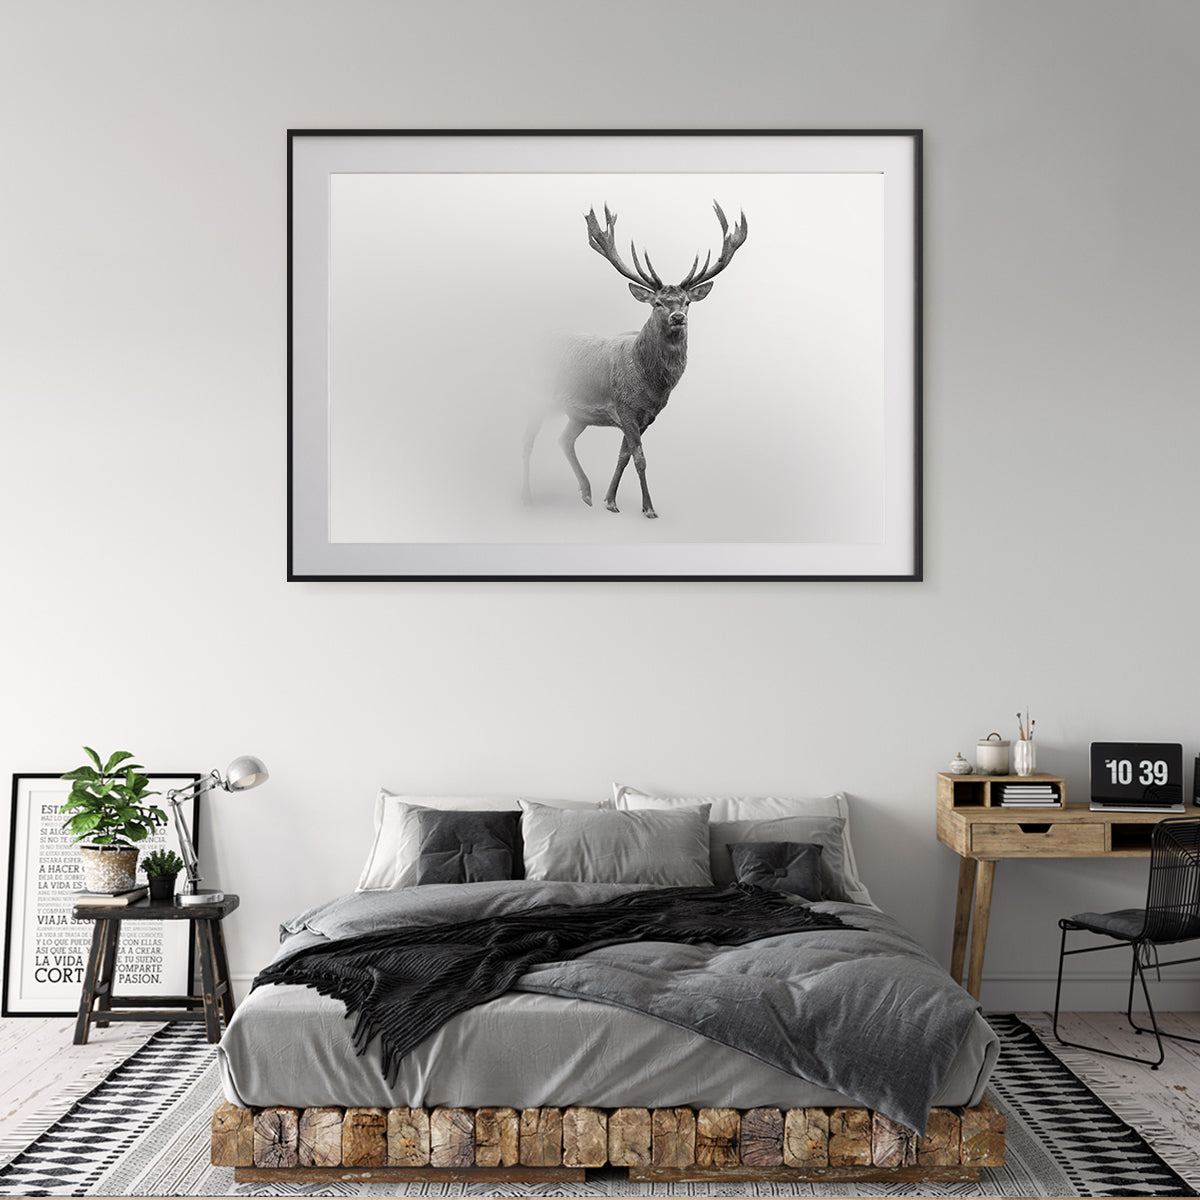 Powerful Red Deer Black and White Posters Wall Decoration-Horizontal Posters NOT FRAMED-CetArt-10″x8″ inches-CetArt